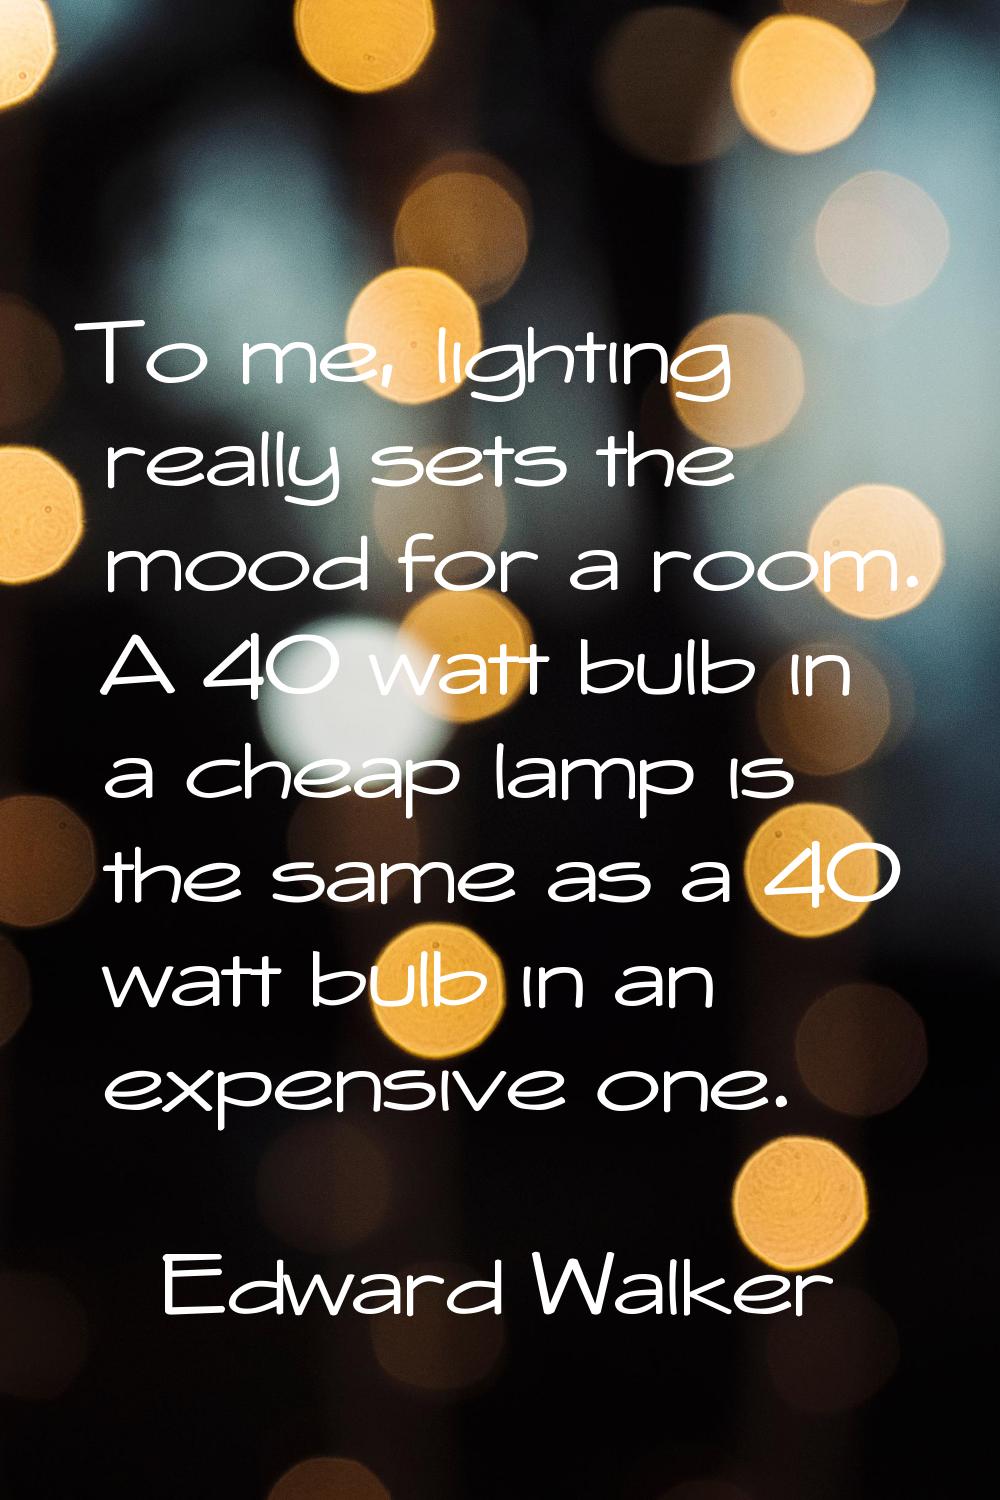 To me, lighting really sets the mood for a room. A 40 watt bulb in a cheap lamp is the same as a 40